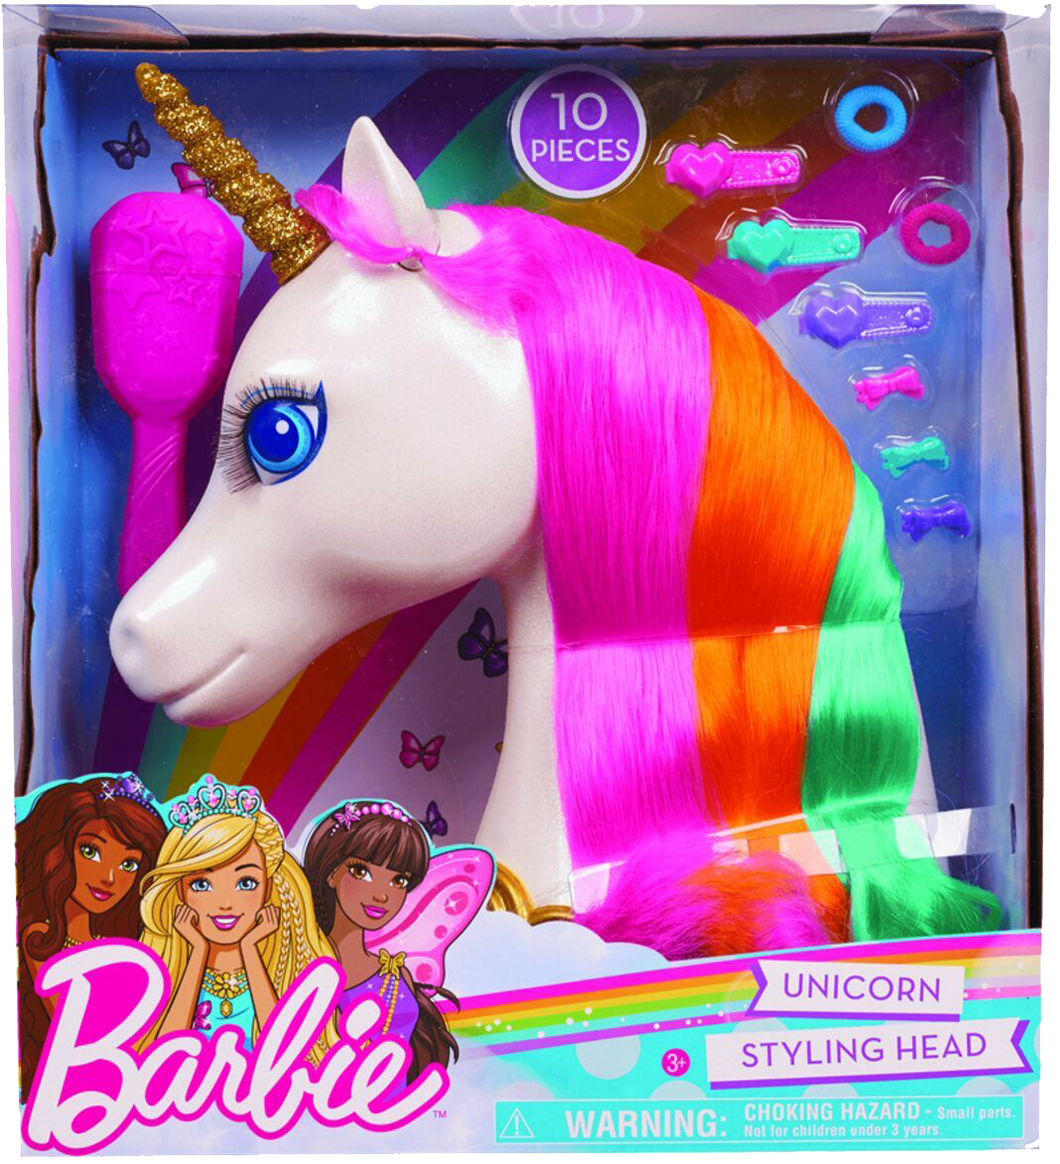 Barbie Dreamtopia Unicorn Styling head is wonderful for little ones who love to play with hair.  Every little girl loves unicorns and this one is simply beautiful with her long lashes and multi-coloured hair.  The Barbie Unicorn styling head can be twisted and tied with the clips and hair bands included in the box and her hair can be made silky smooth with the brush provided.